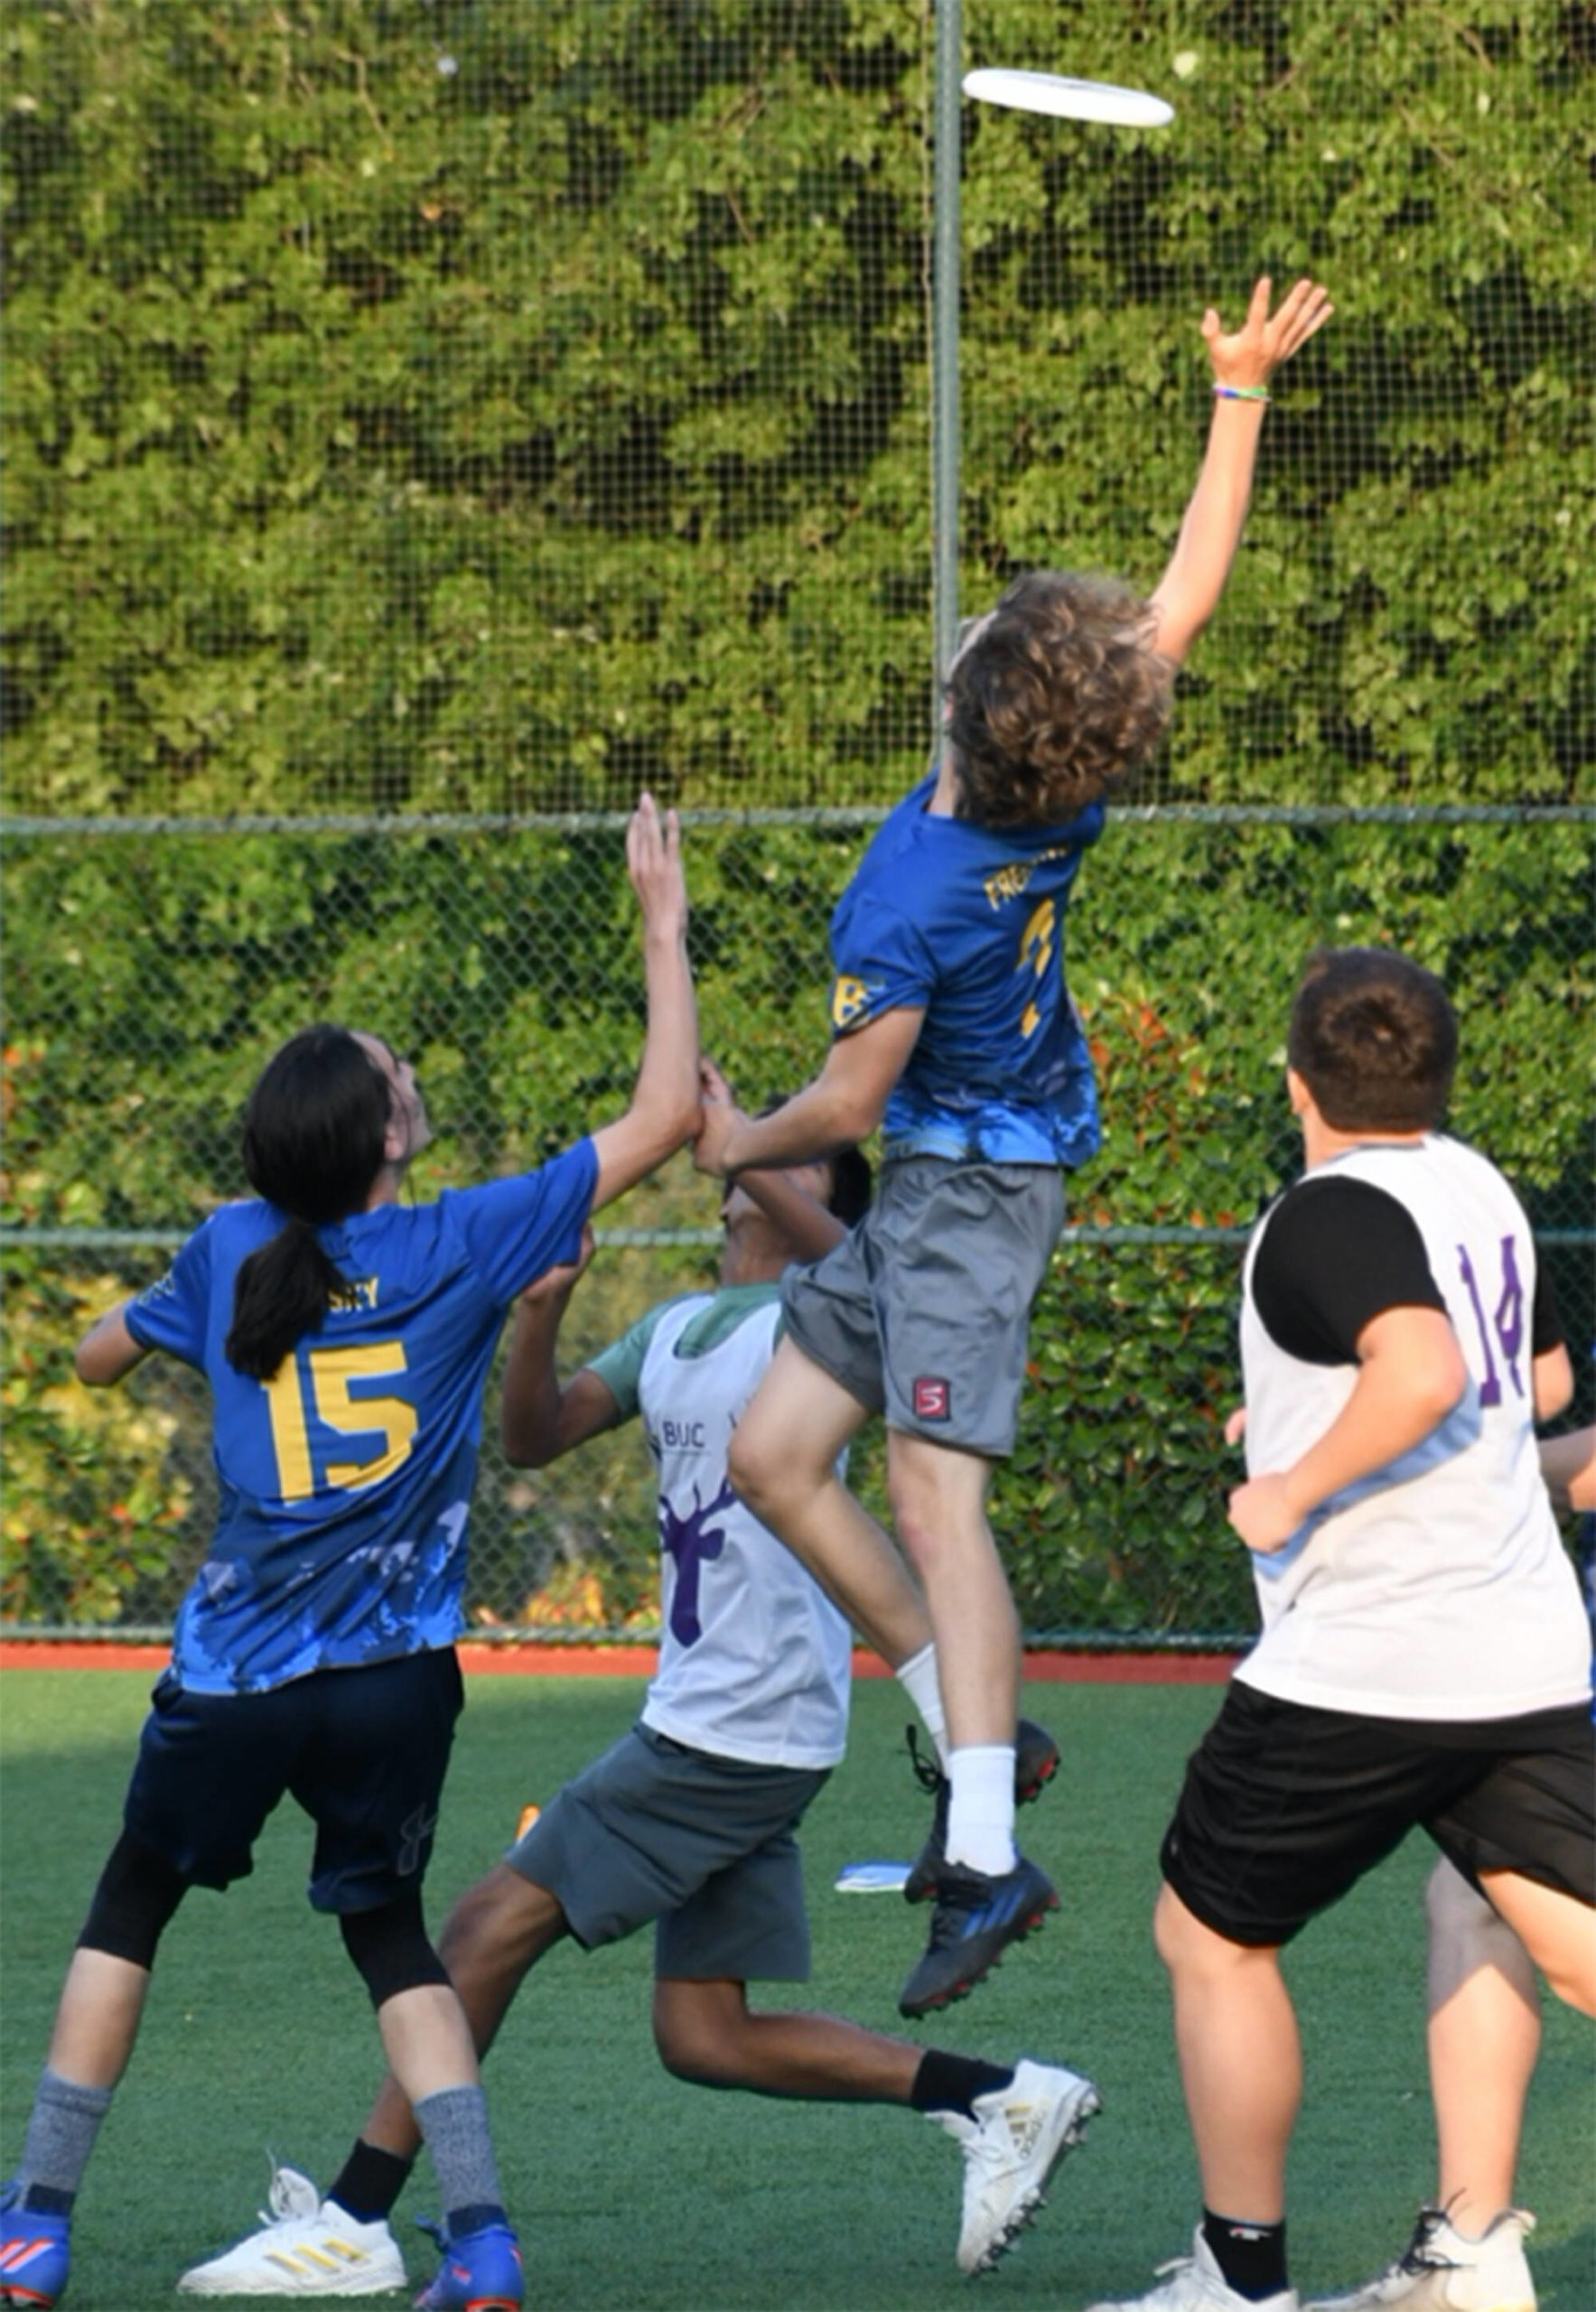 Spencer Freeman skies high to grab a disc against Mercer Island High School, in the divisional playoff game to go to the state tournament.